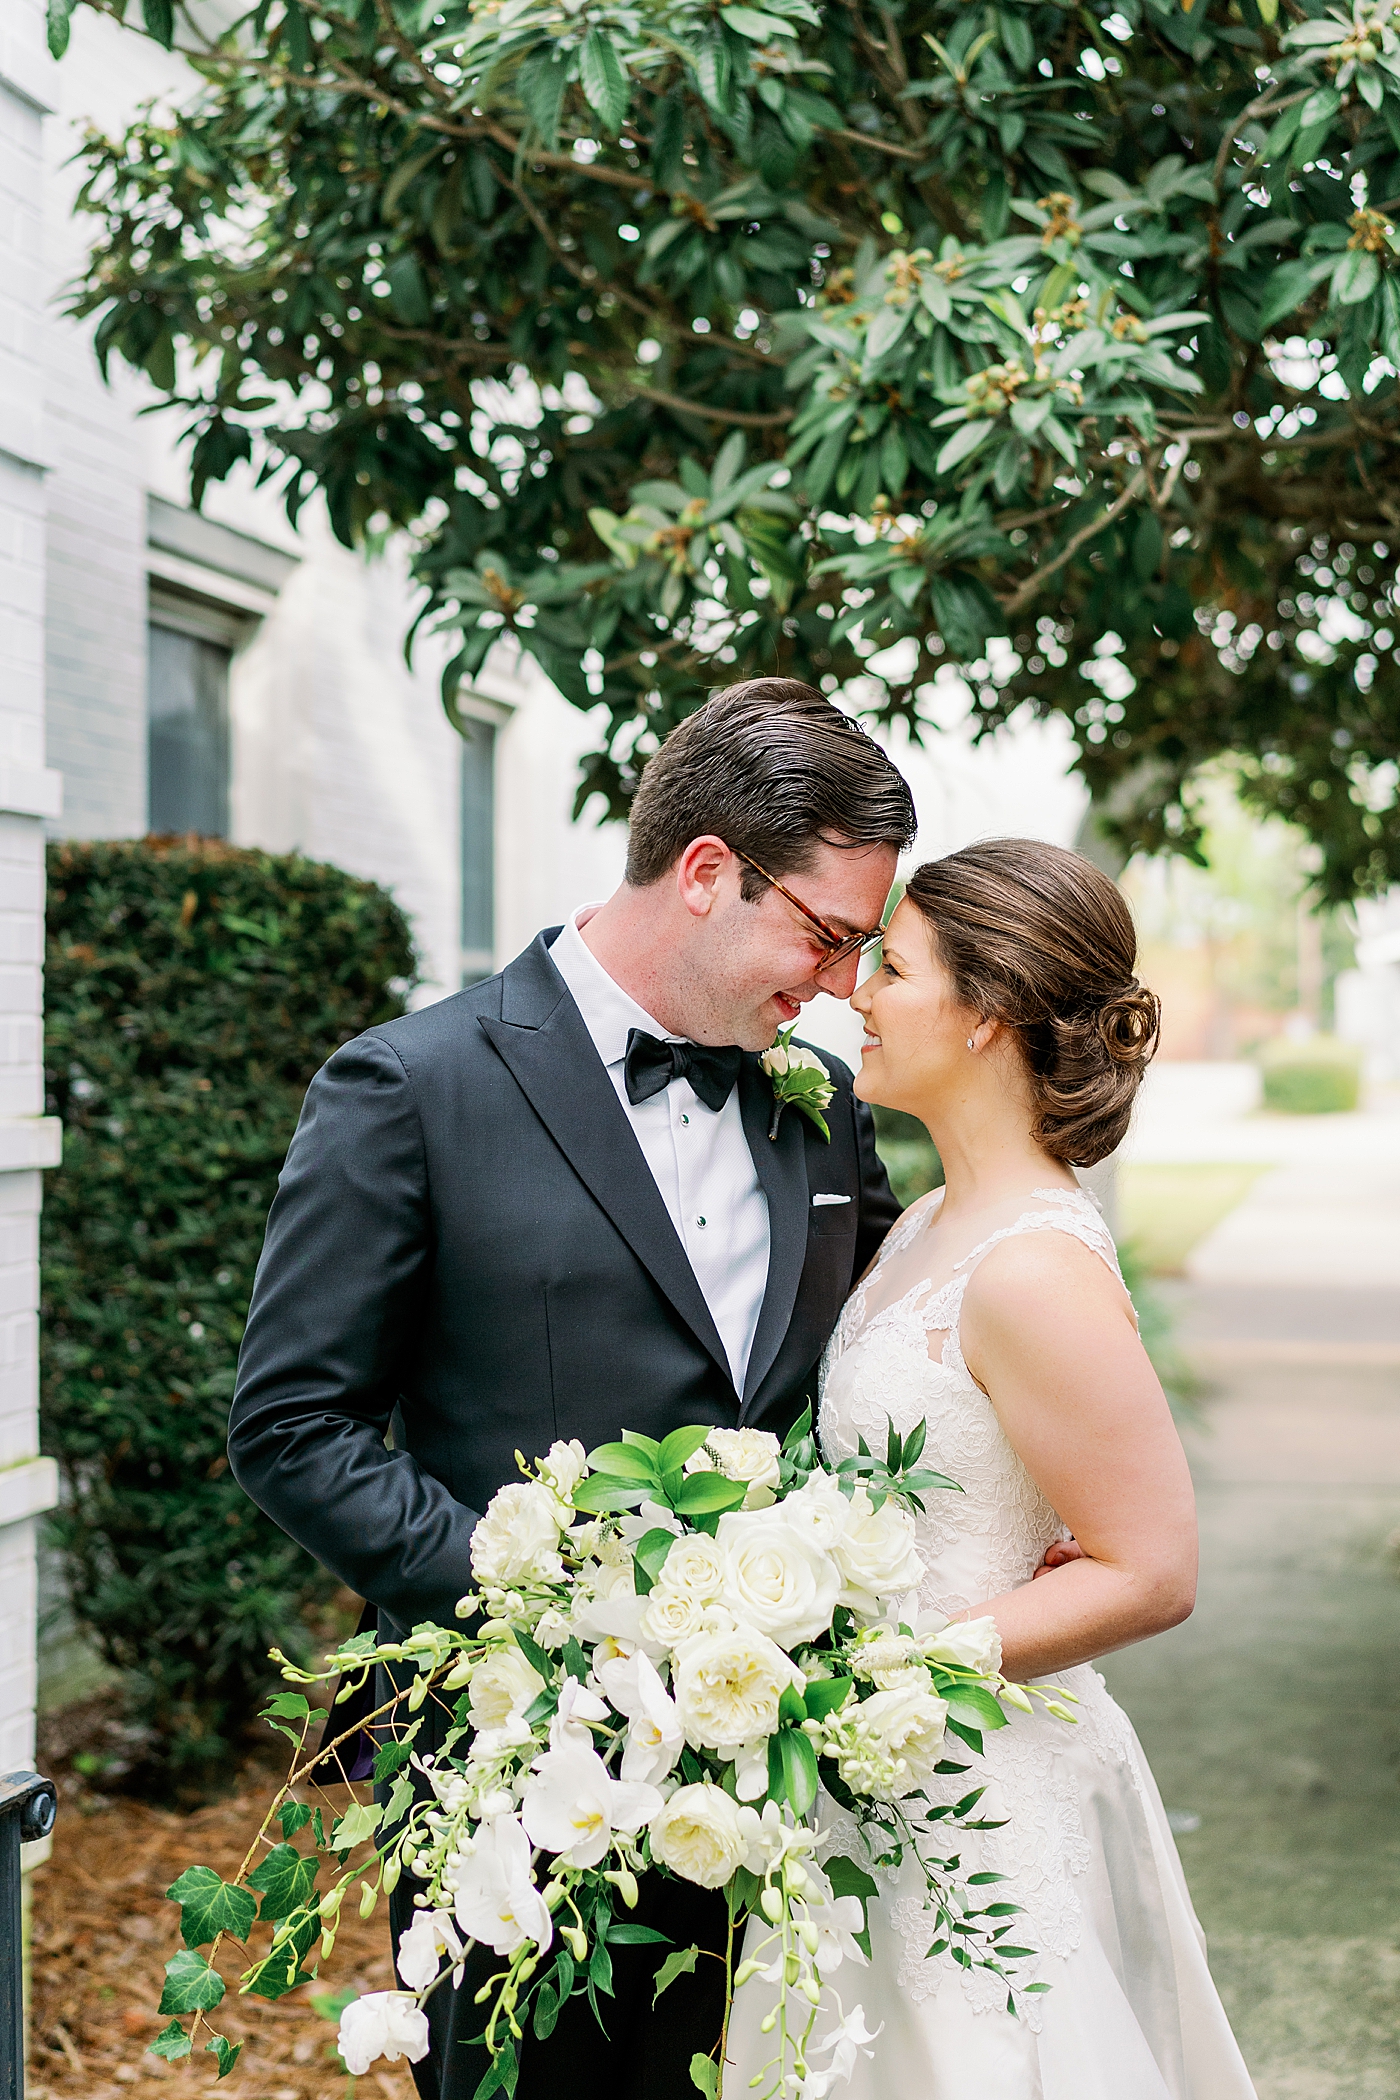 Bride and groom forehead to forehead | Photo by Annie Laura Photography